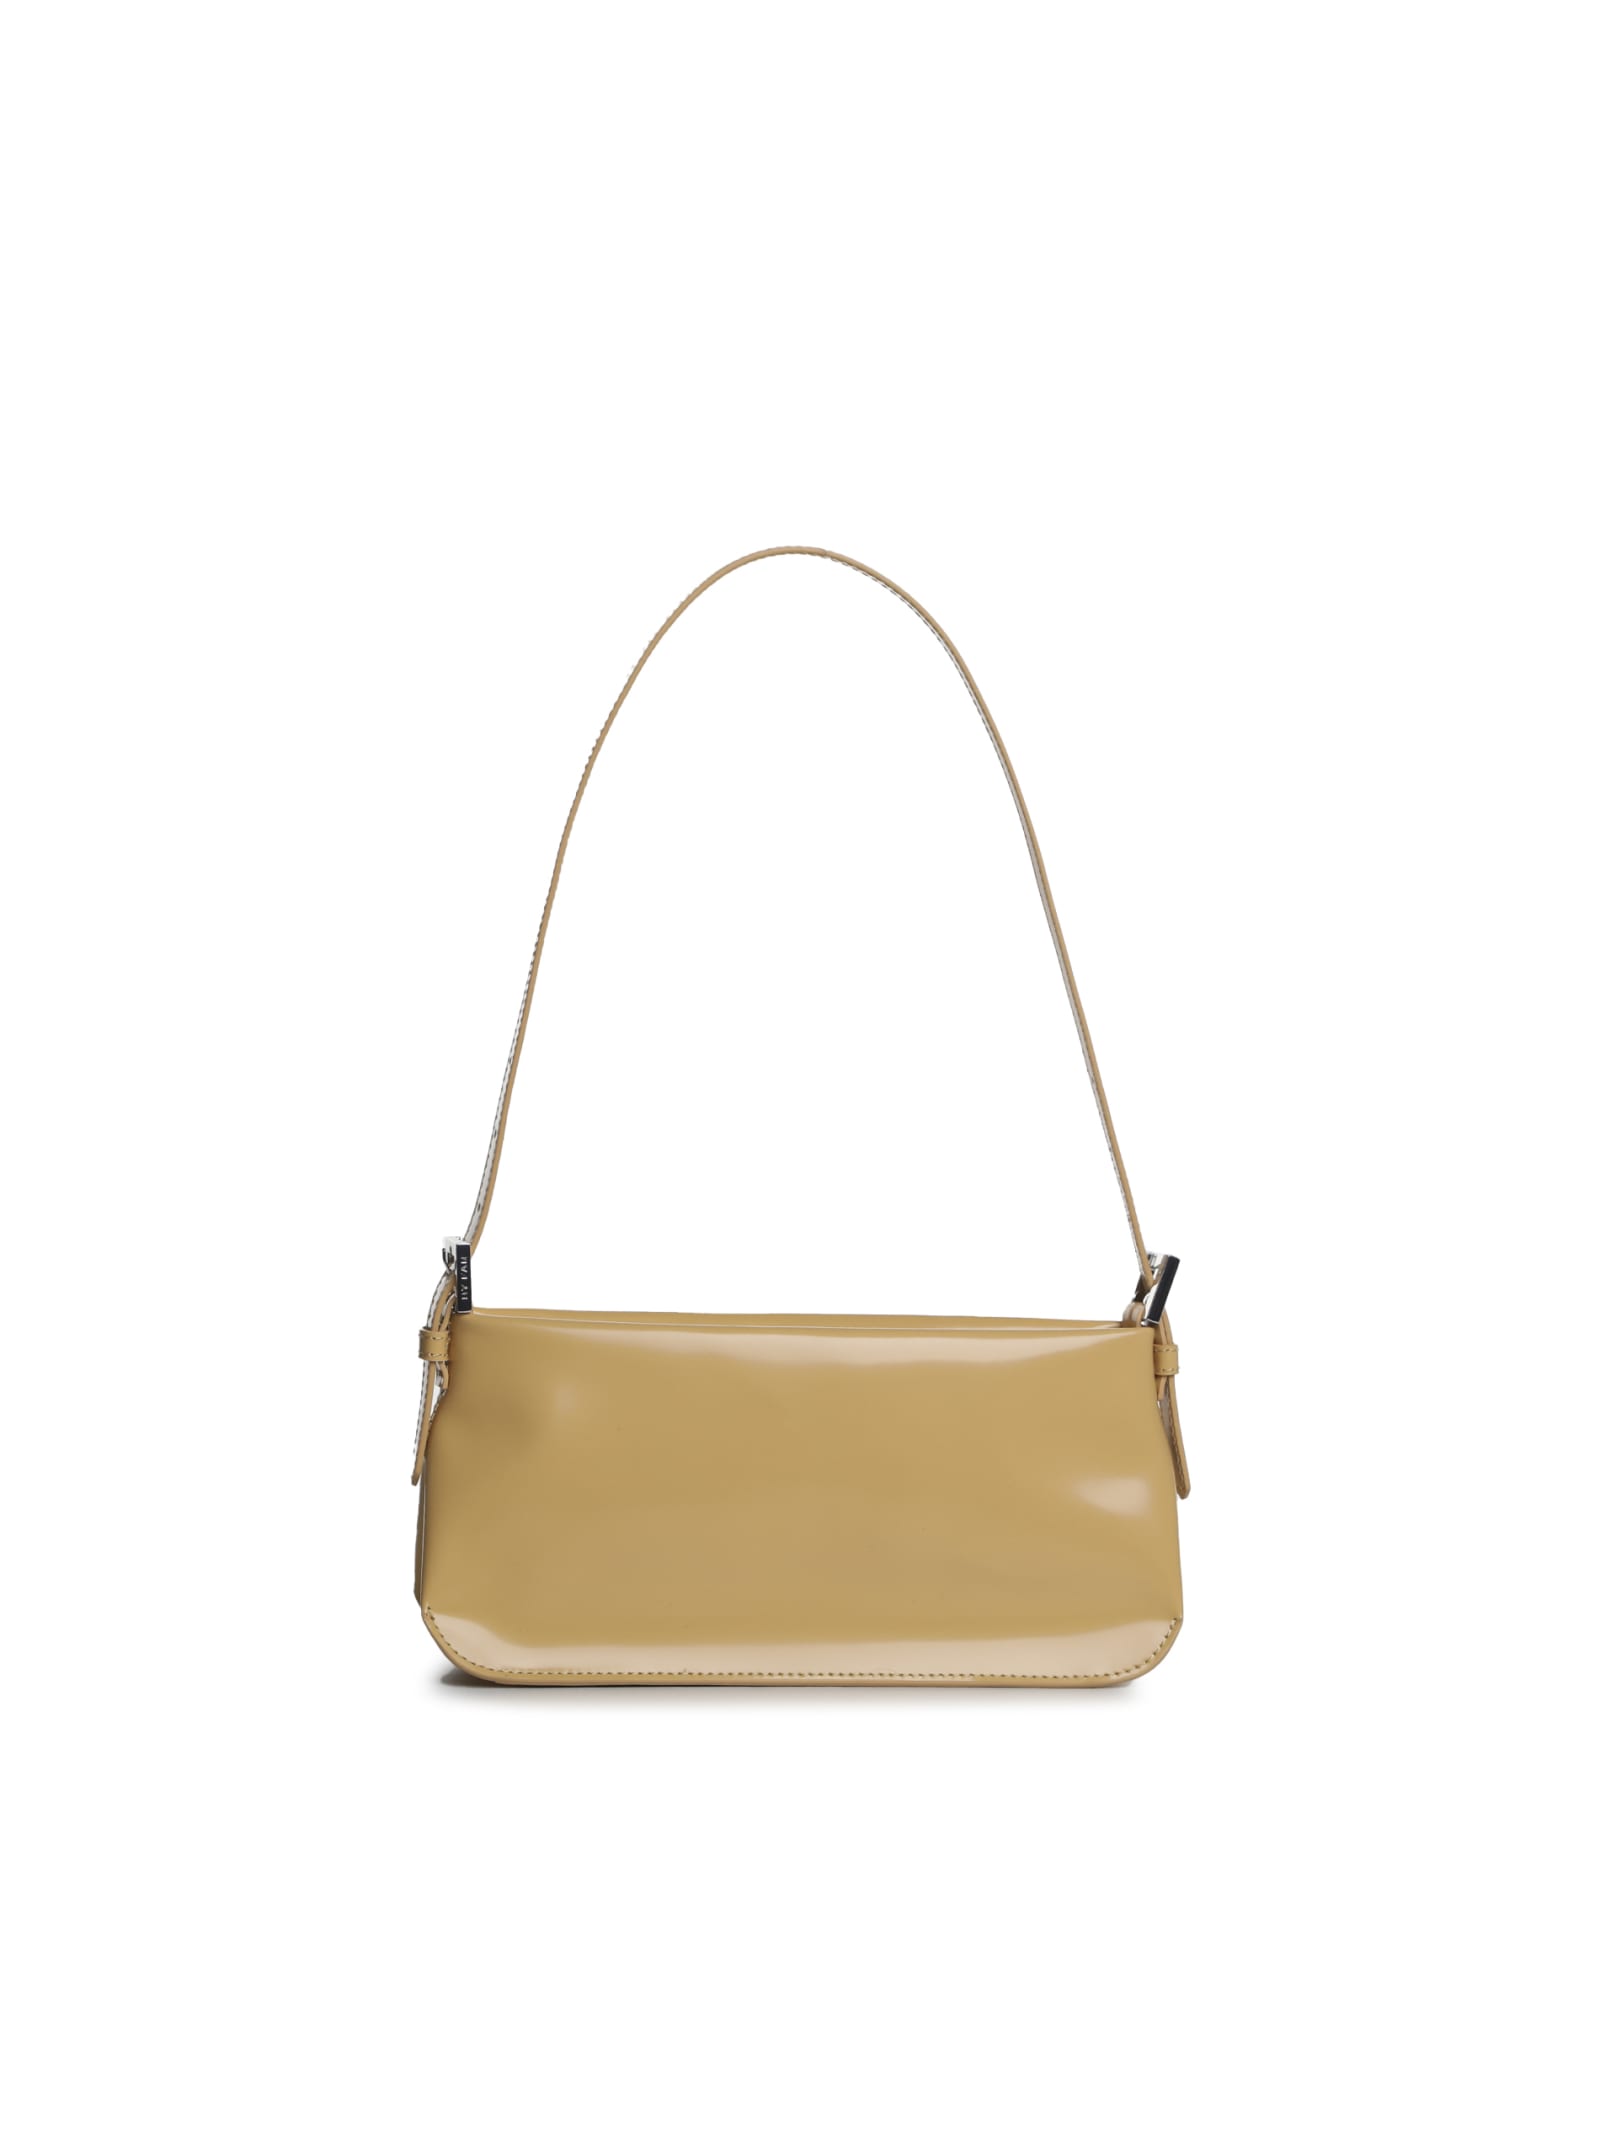 BY FAR Dulce Shoulder Bag In Patent Leather